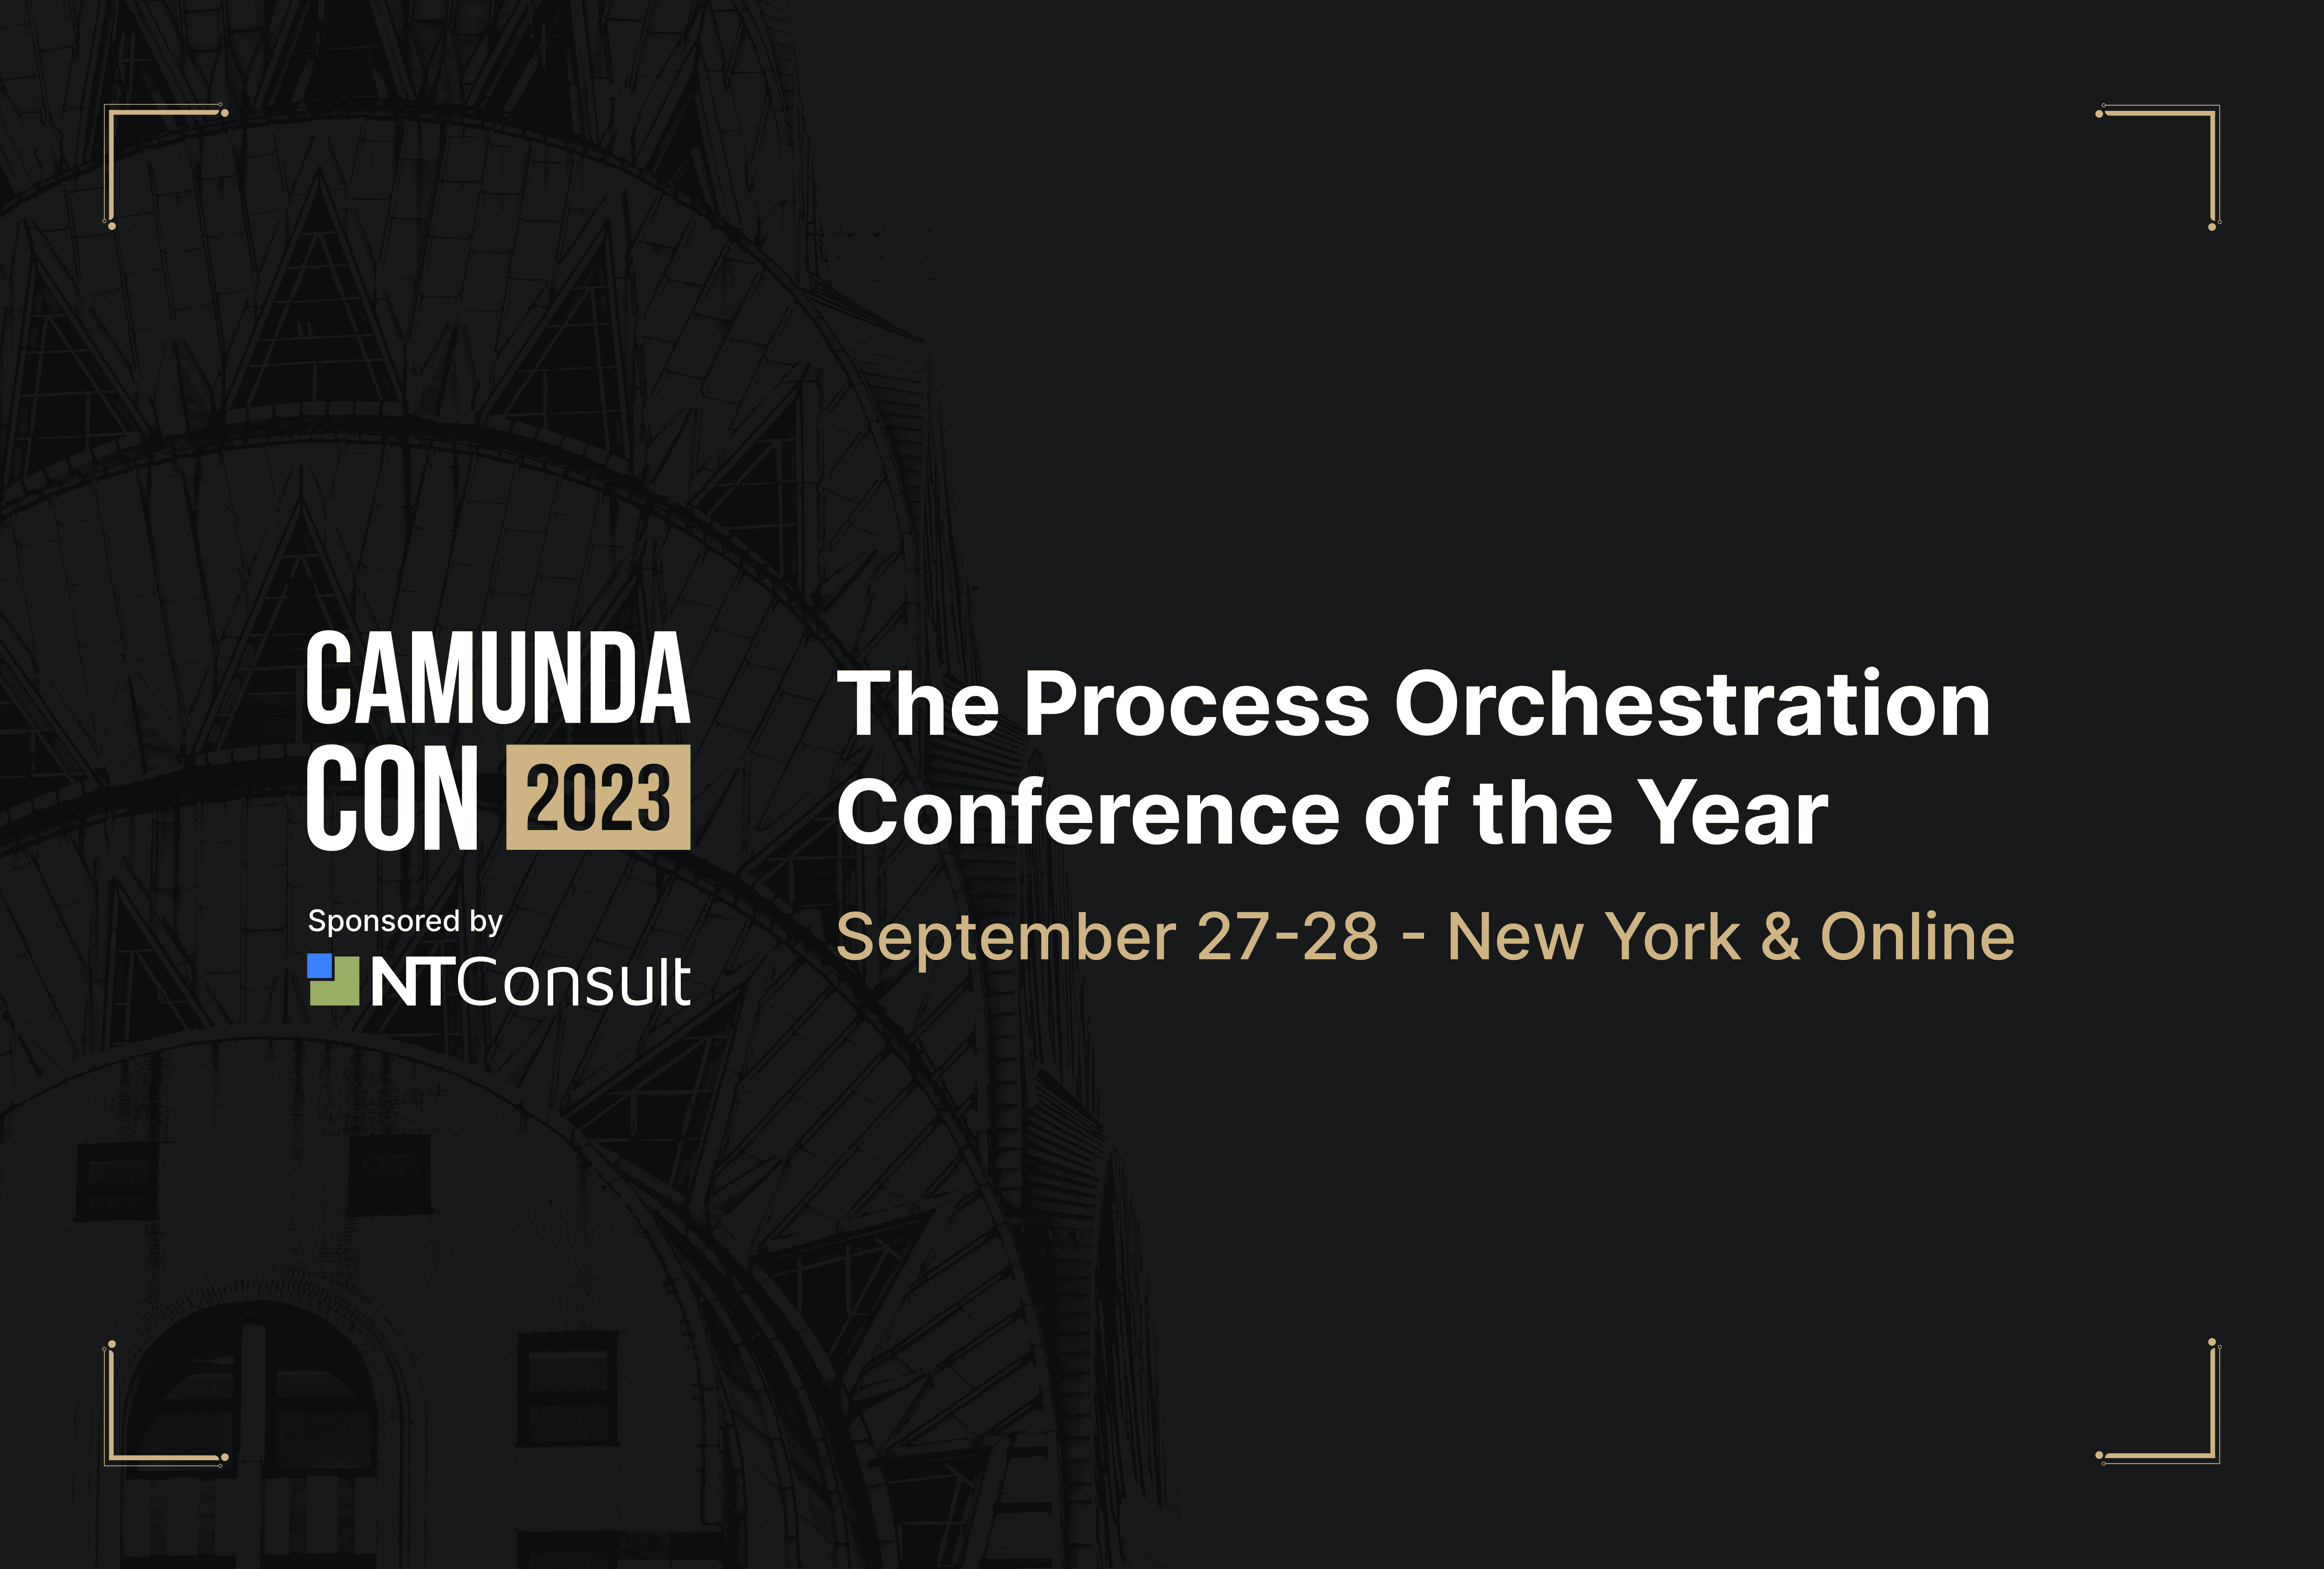 CamundaCon 2023: Come to the Process Orchestration Conference of the Year